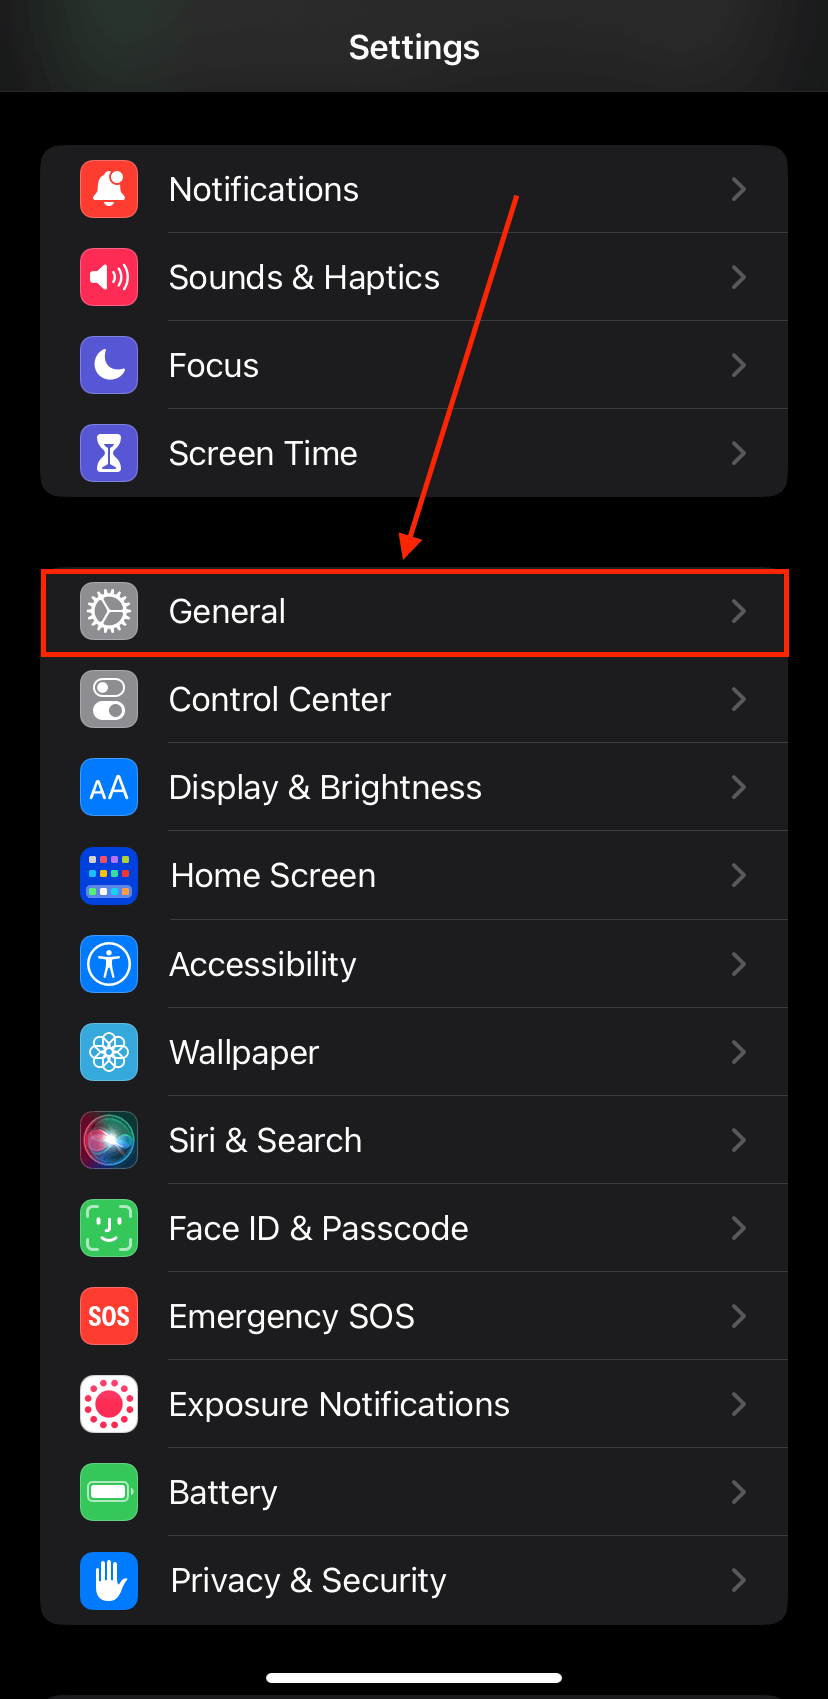 General option in the iPhone Settings app